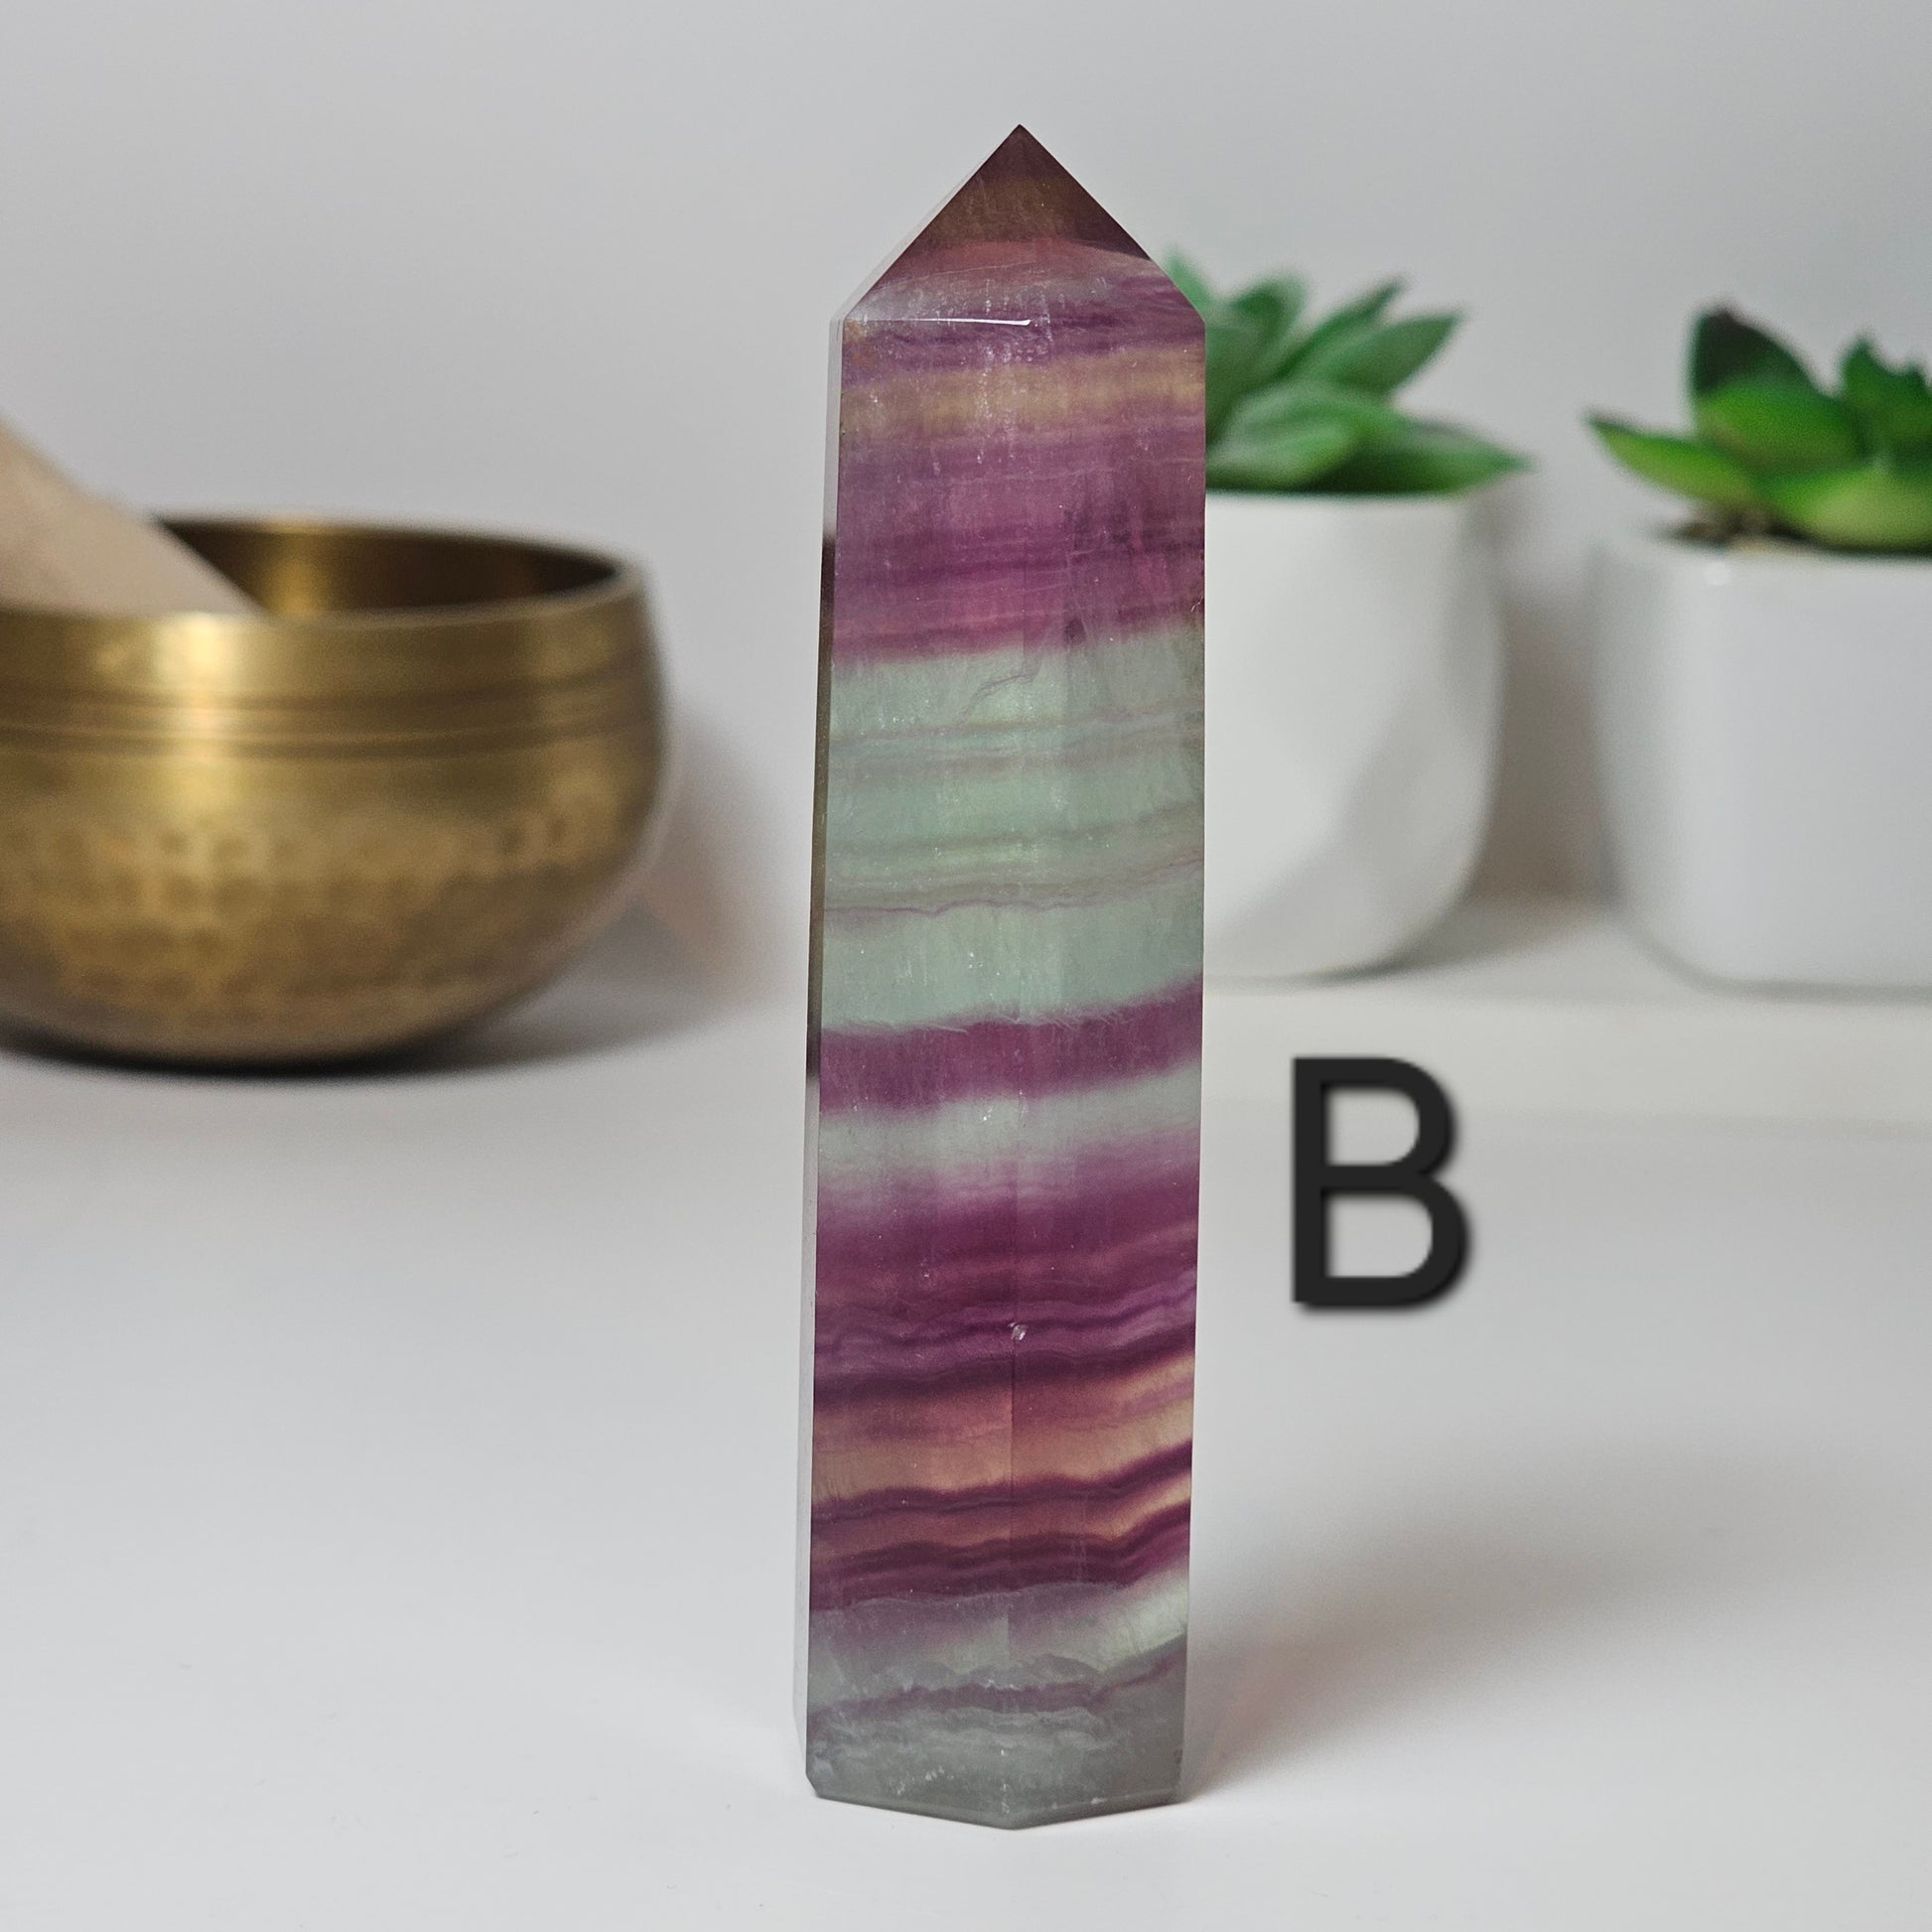 Gorgeous Candy Fluorite towers.